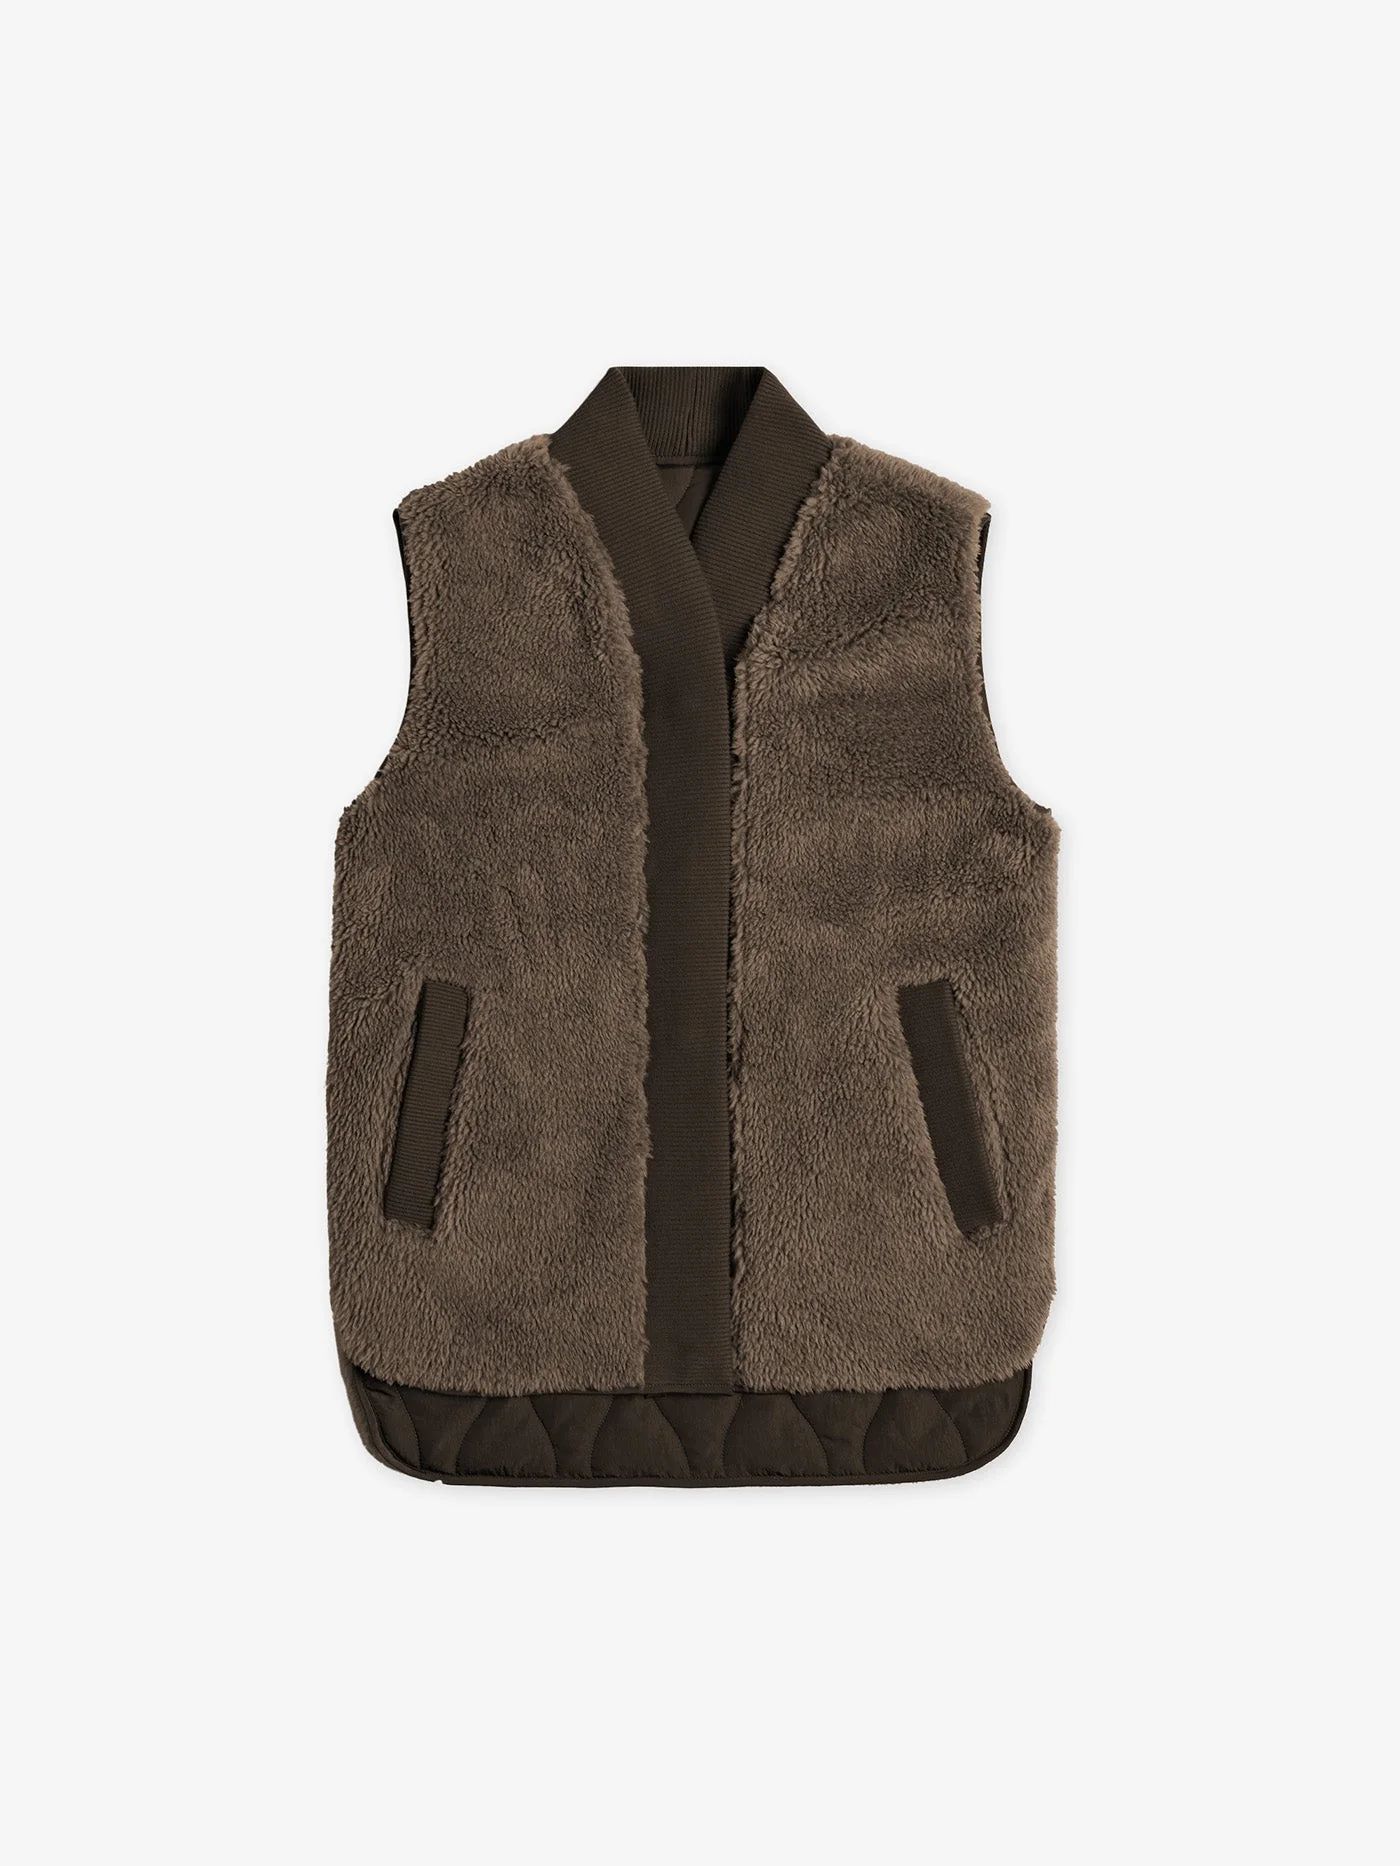 Covey Reversible Quilt Gilet | Varley USA